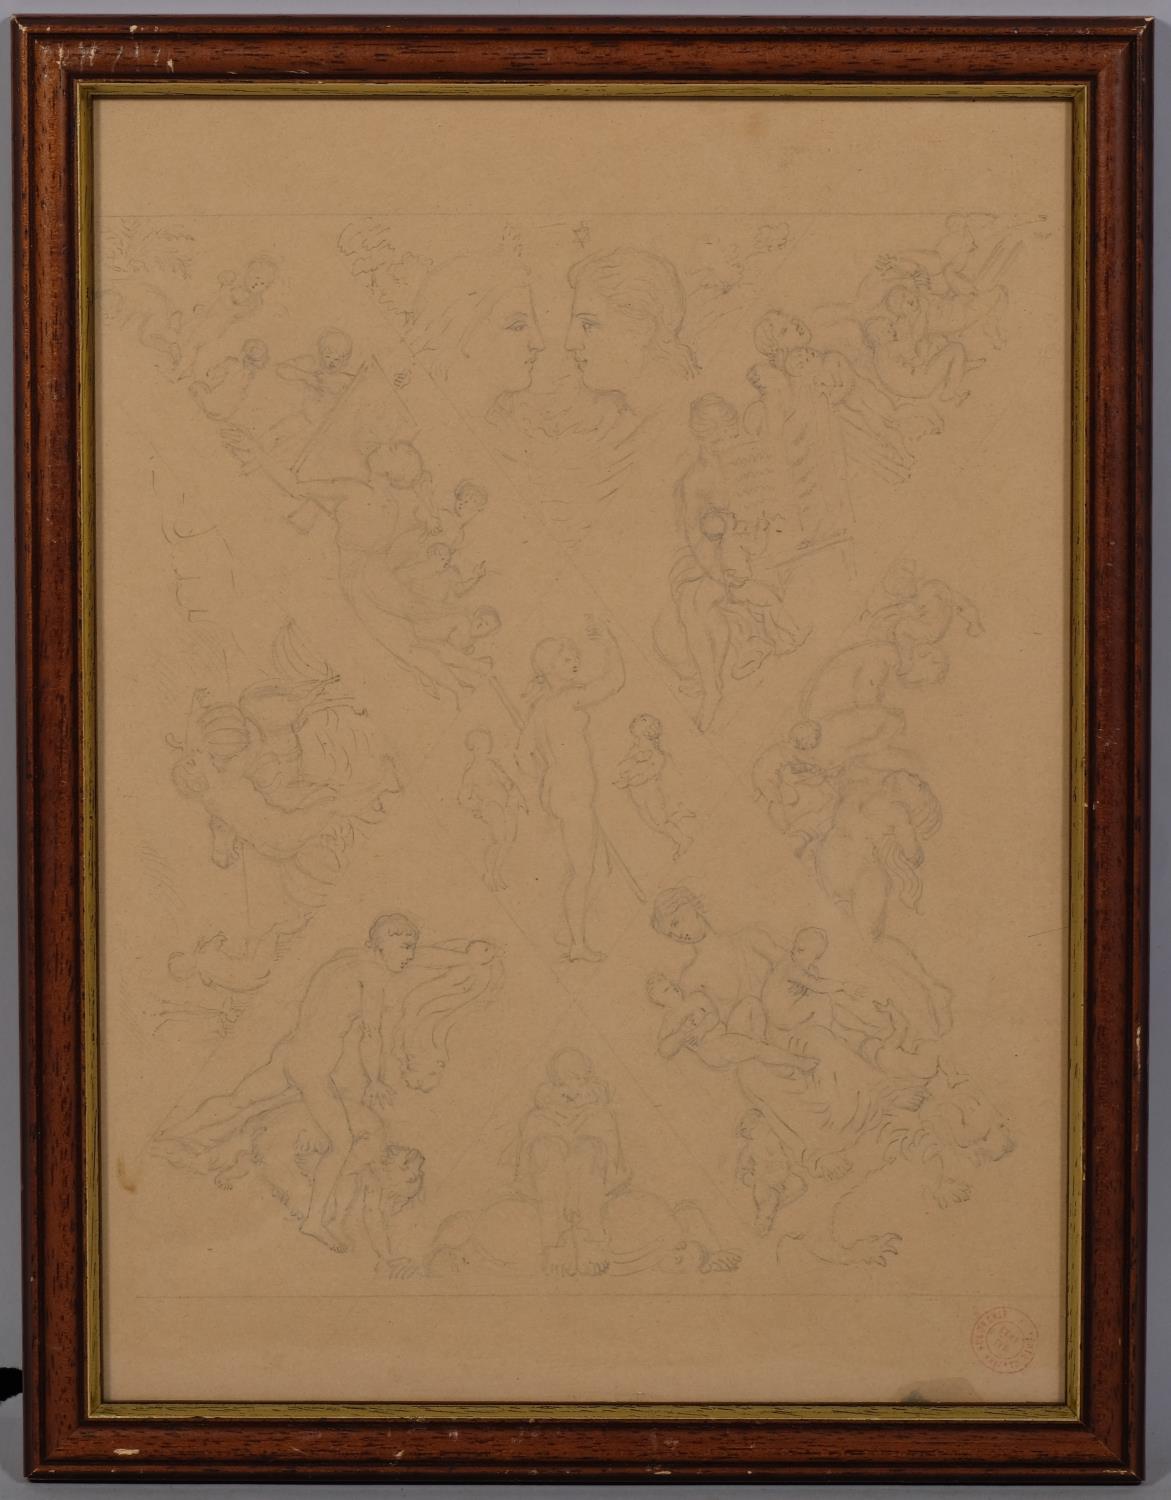 19th century French School, group of Classical figures studies for a mural, pencil on paper with